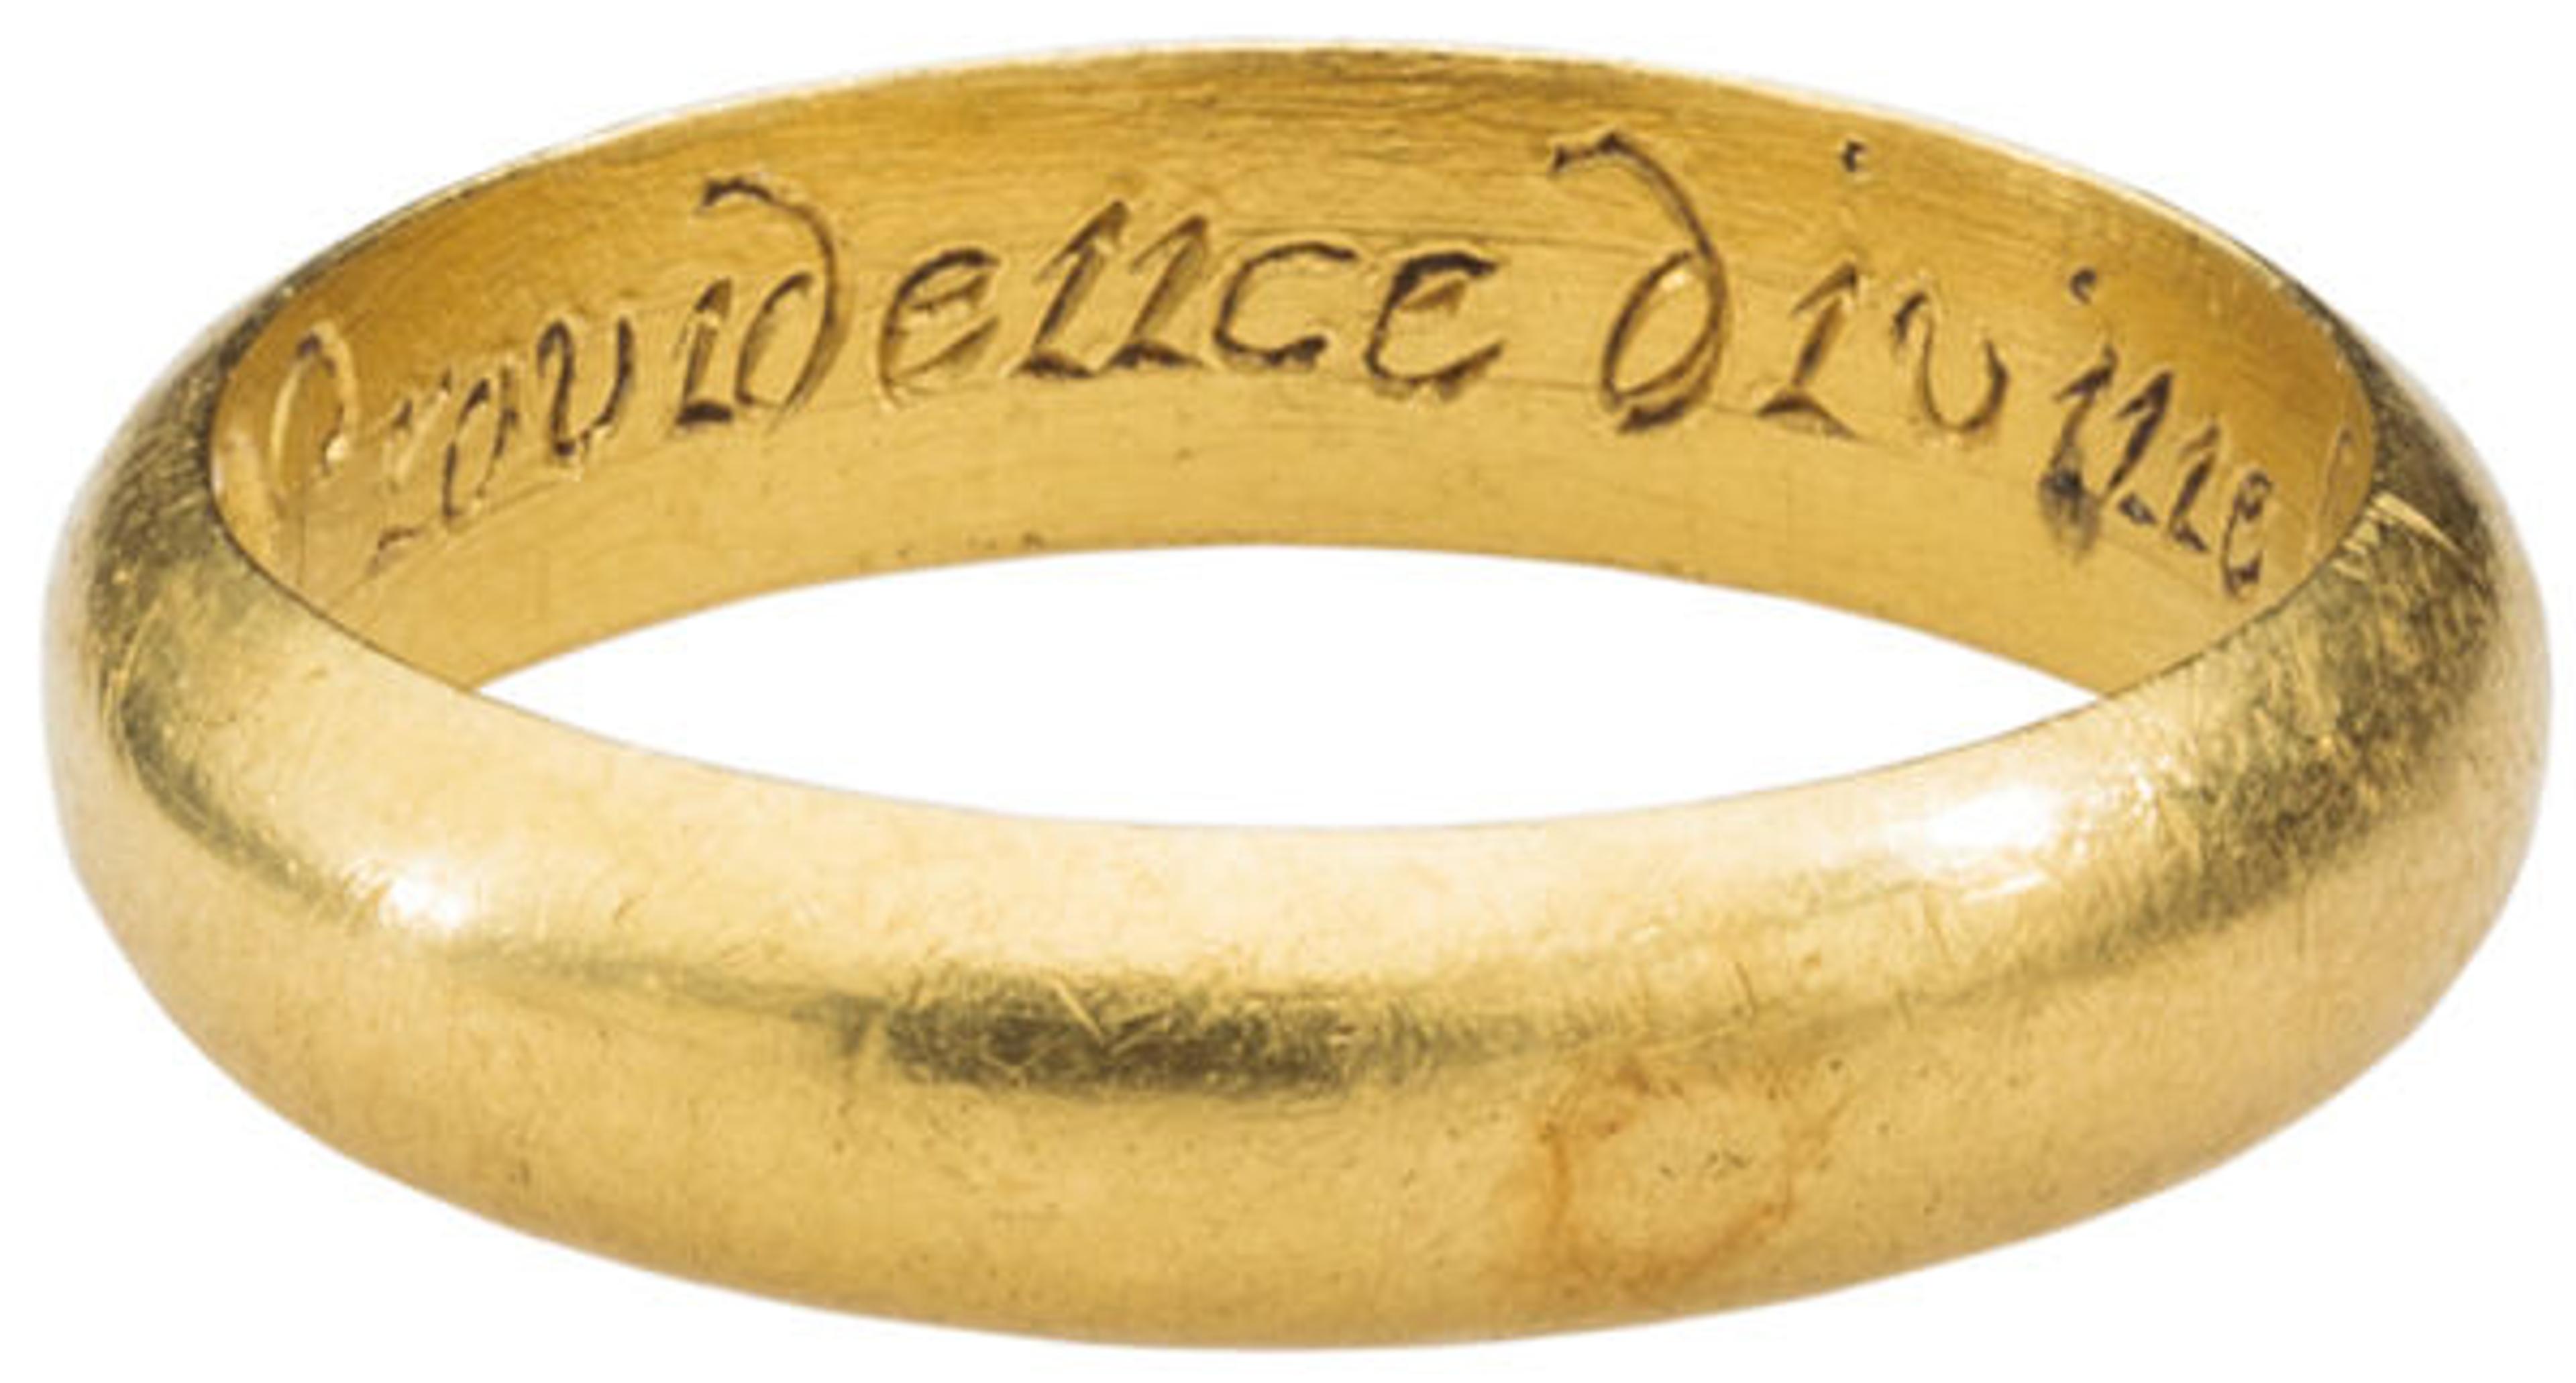 Renaissance Posy Ring "Providence Divine Hath Made Thee Mine," ca. 1600–1650. British. Gold; Circumference 62 mm.; weight 9 g. 